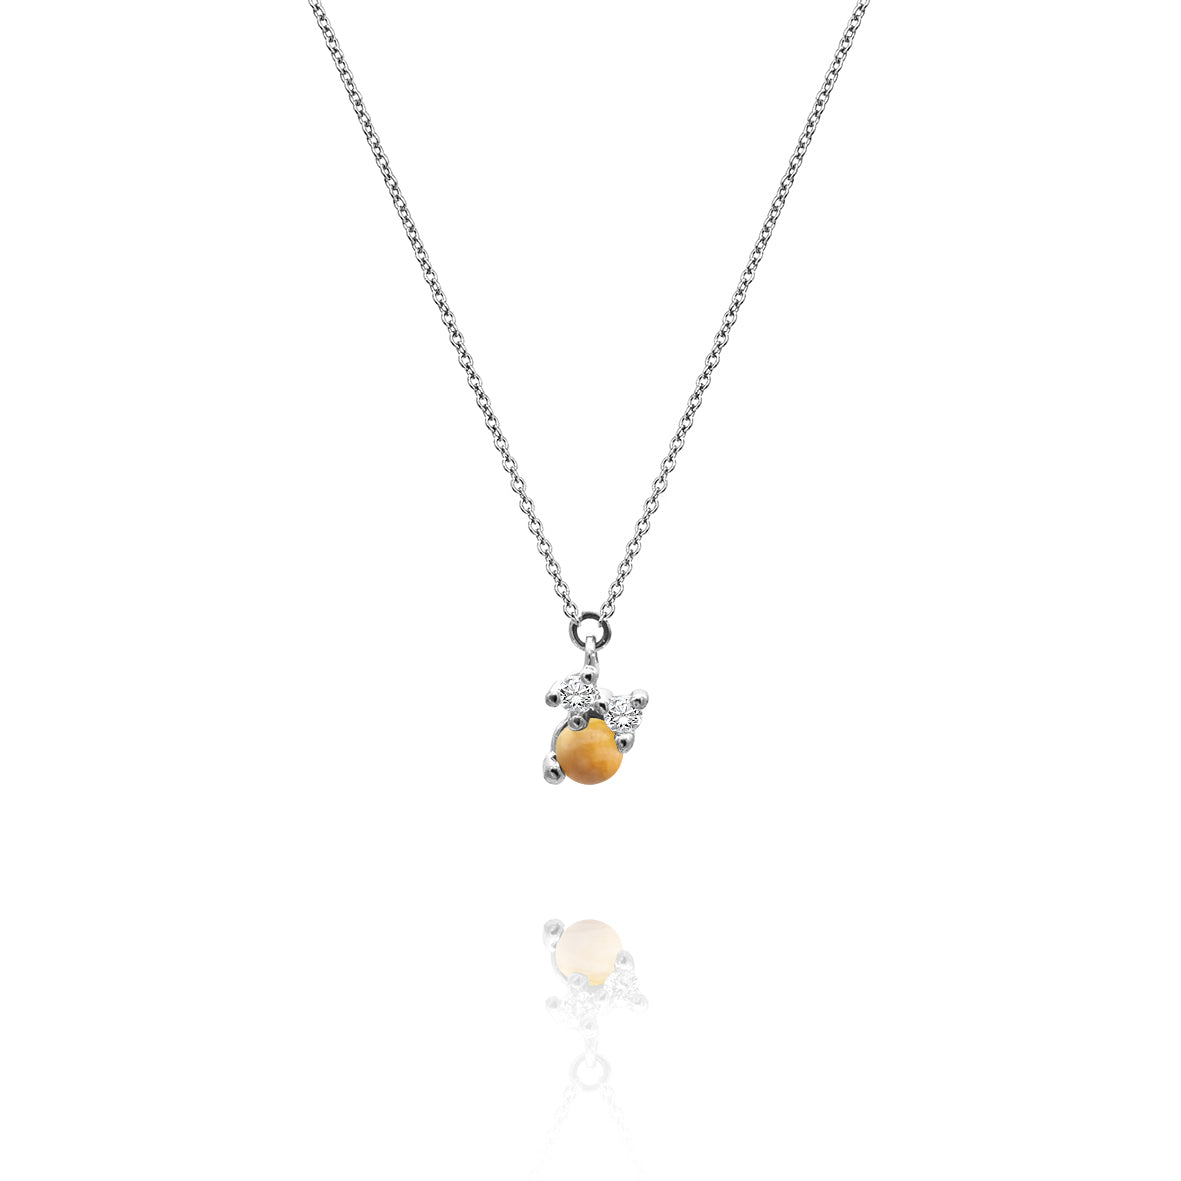 Stellini pendant "smal" in 585/- gold with citrine